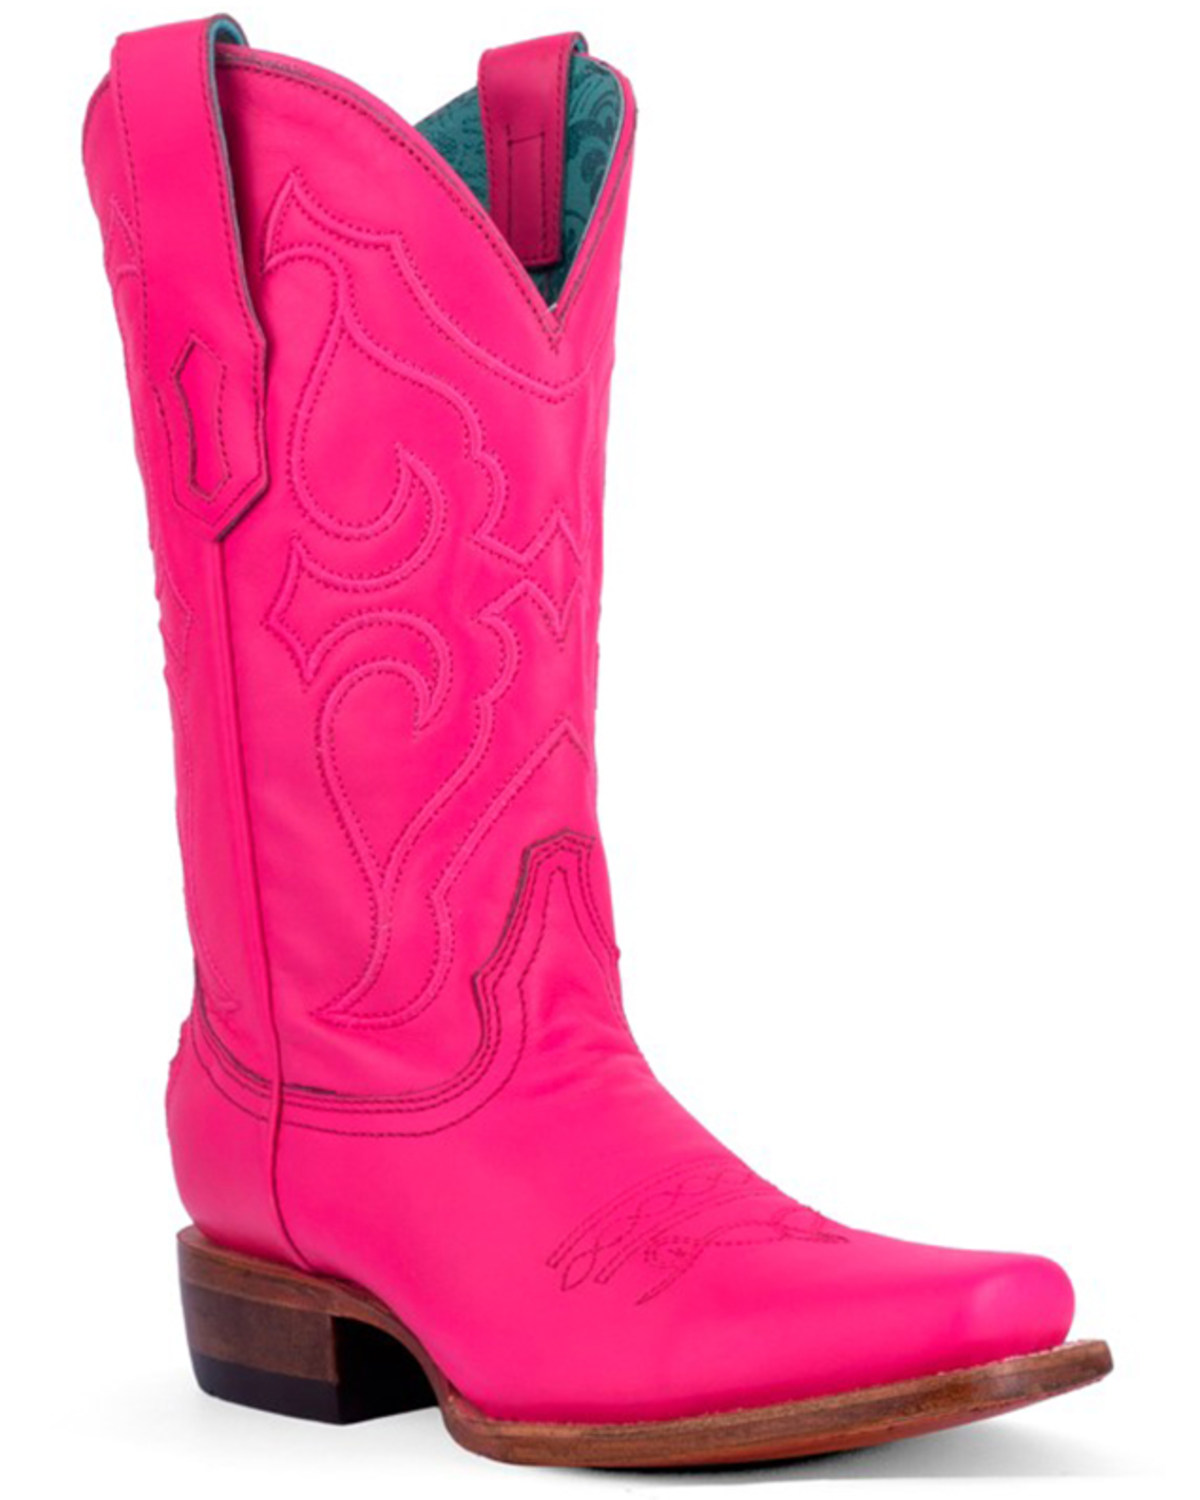 Corral Women's Embroidered Western Boots - Square Toe